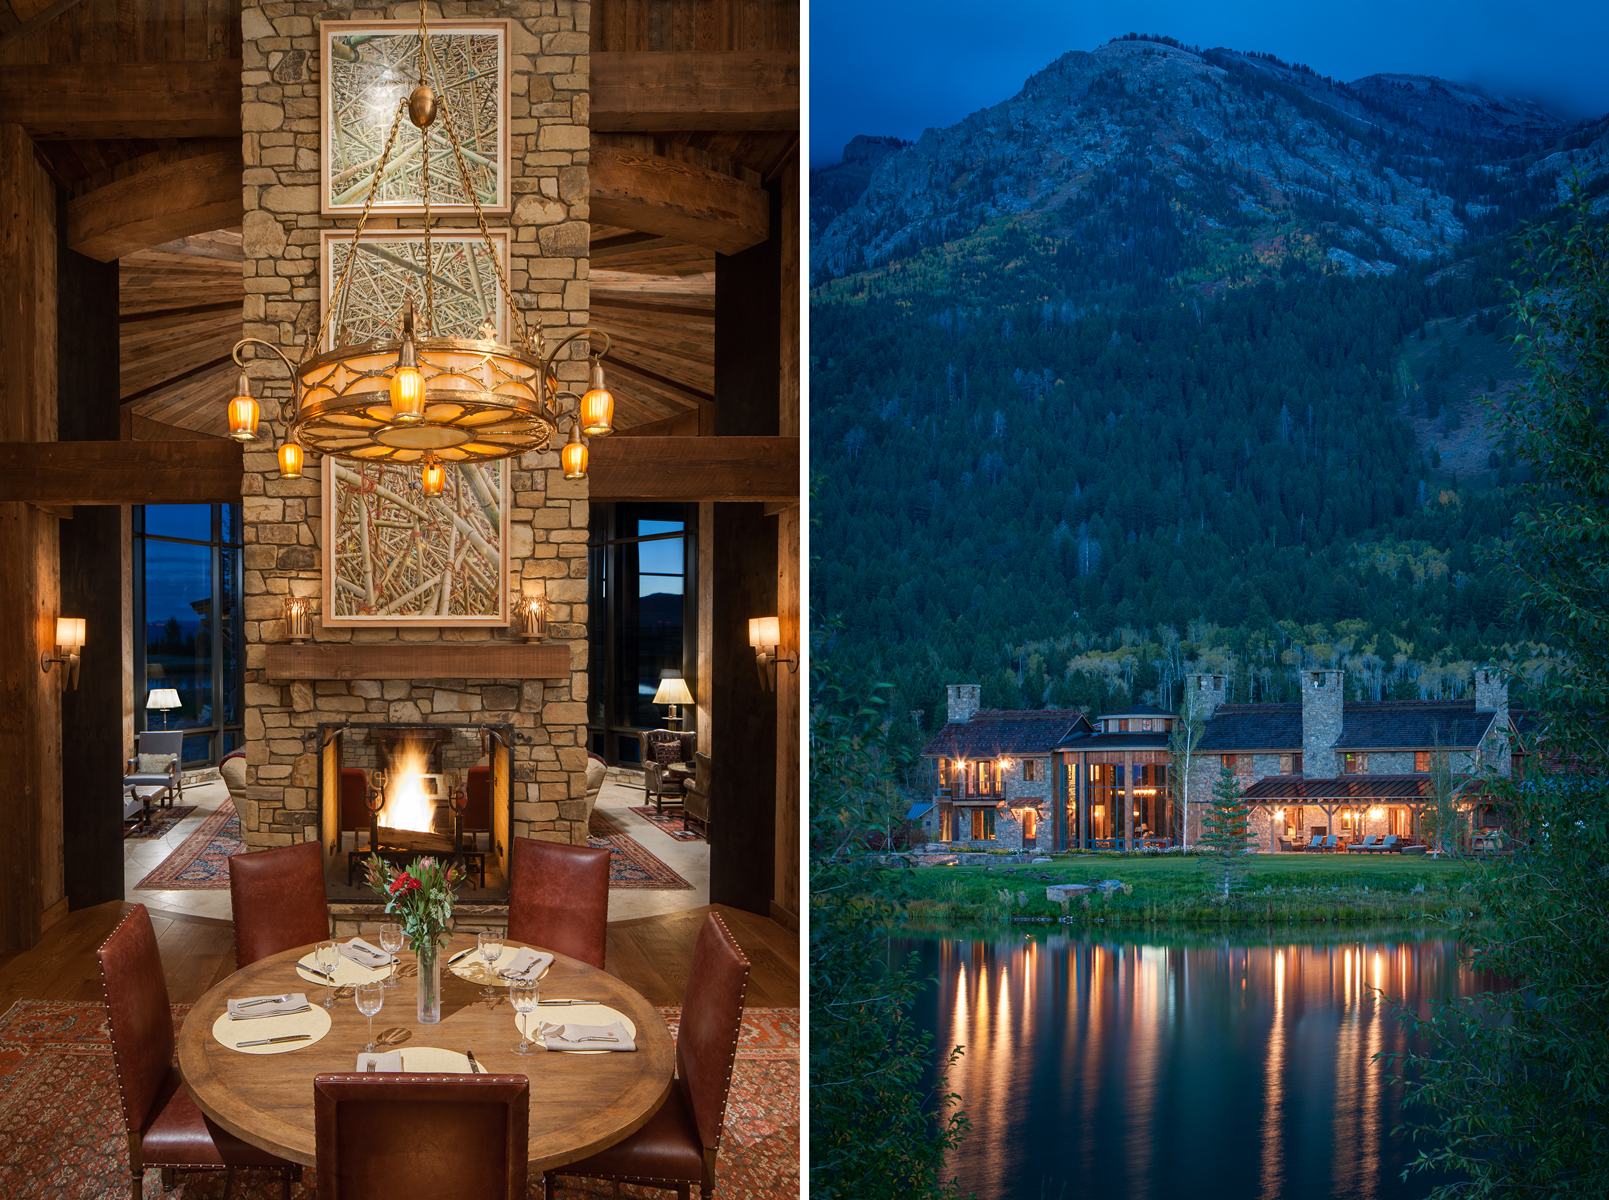 Two views of a  private residence in the Shoting Star Development in Jackson, Wyoming. One view is an interior showing the main dining room table at dusk with warm wood tones and a roaring fire in the fire place and the other is an exterior of the home at dawn taken from across the lake with reflections on the water.